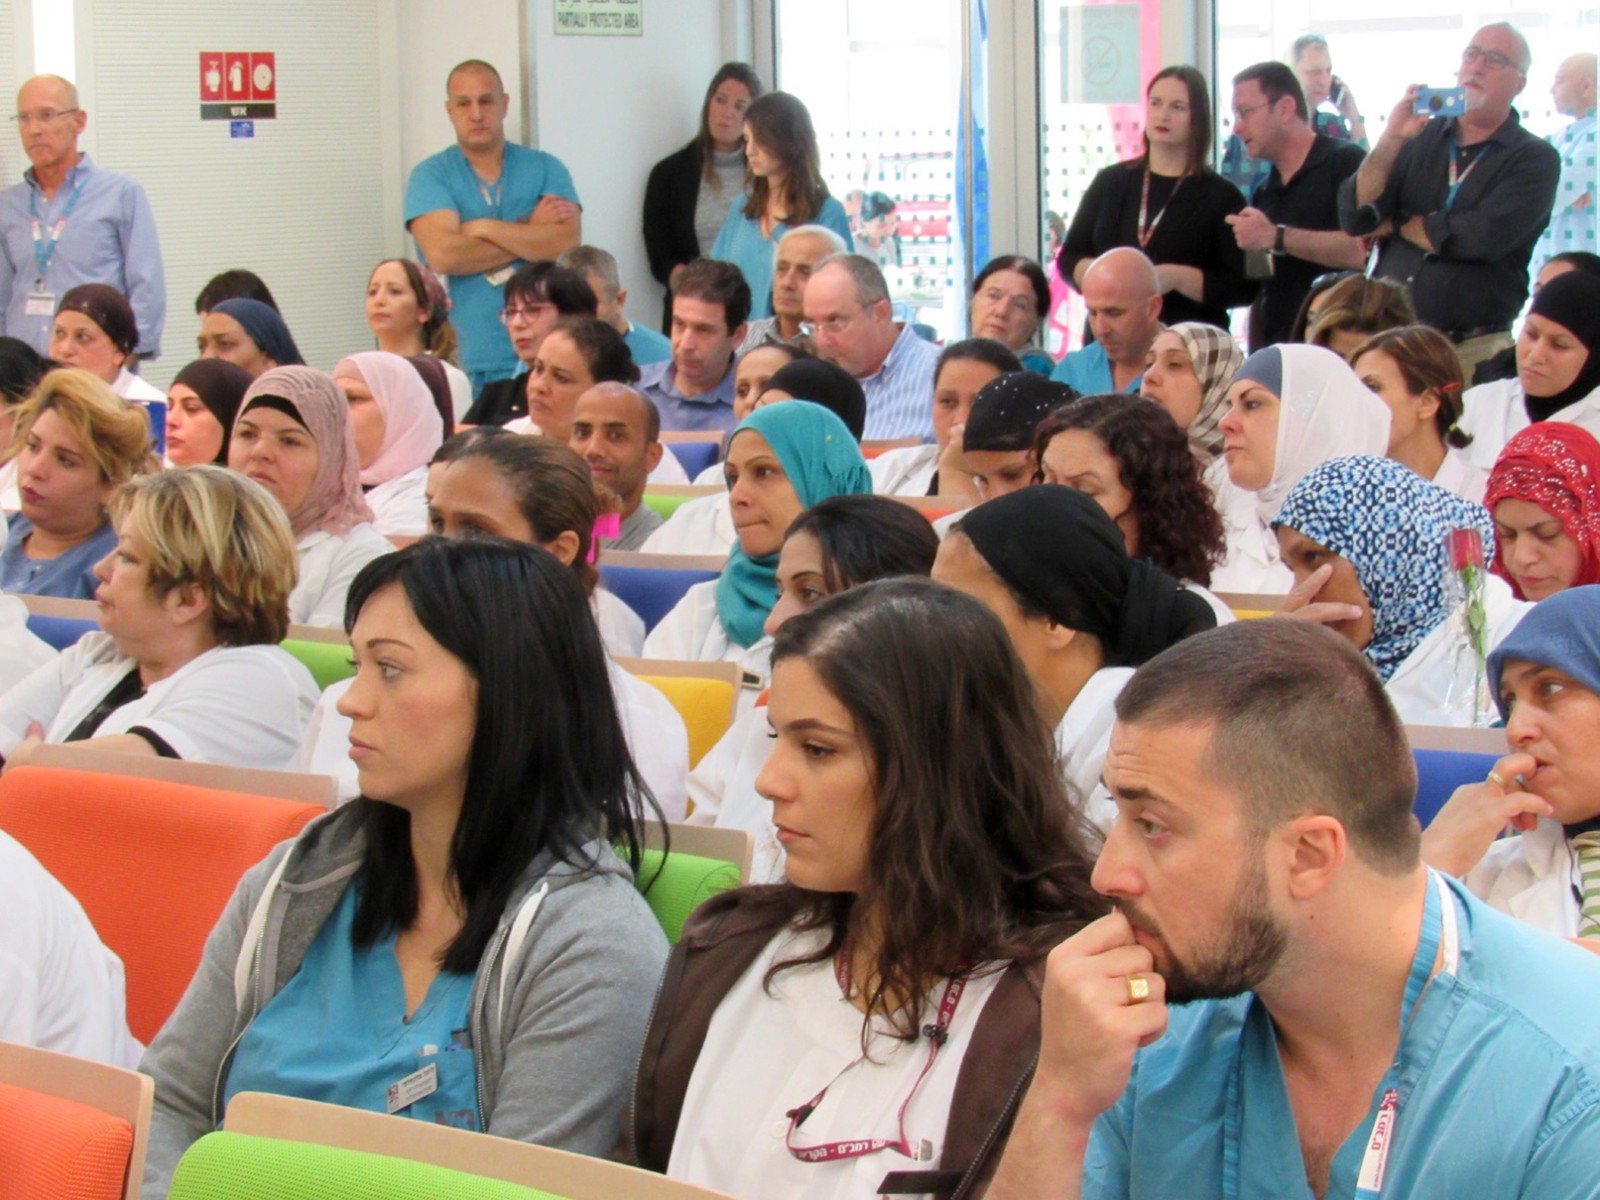 220 Contracted workers are taken on as regular workers at Rambam hospital in Haifa. (Photo by Erez Raviv)